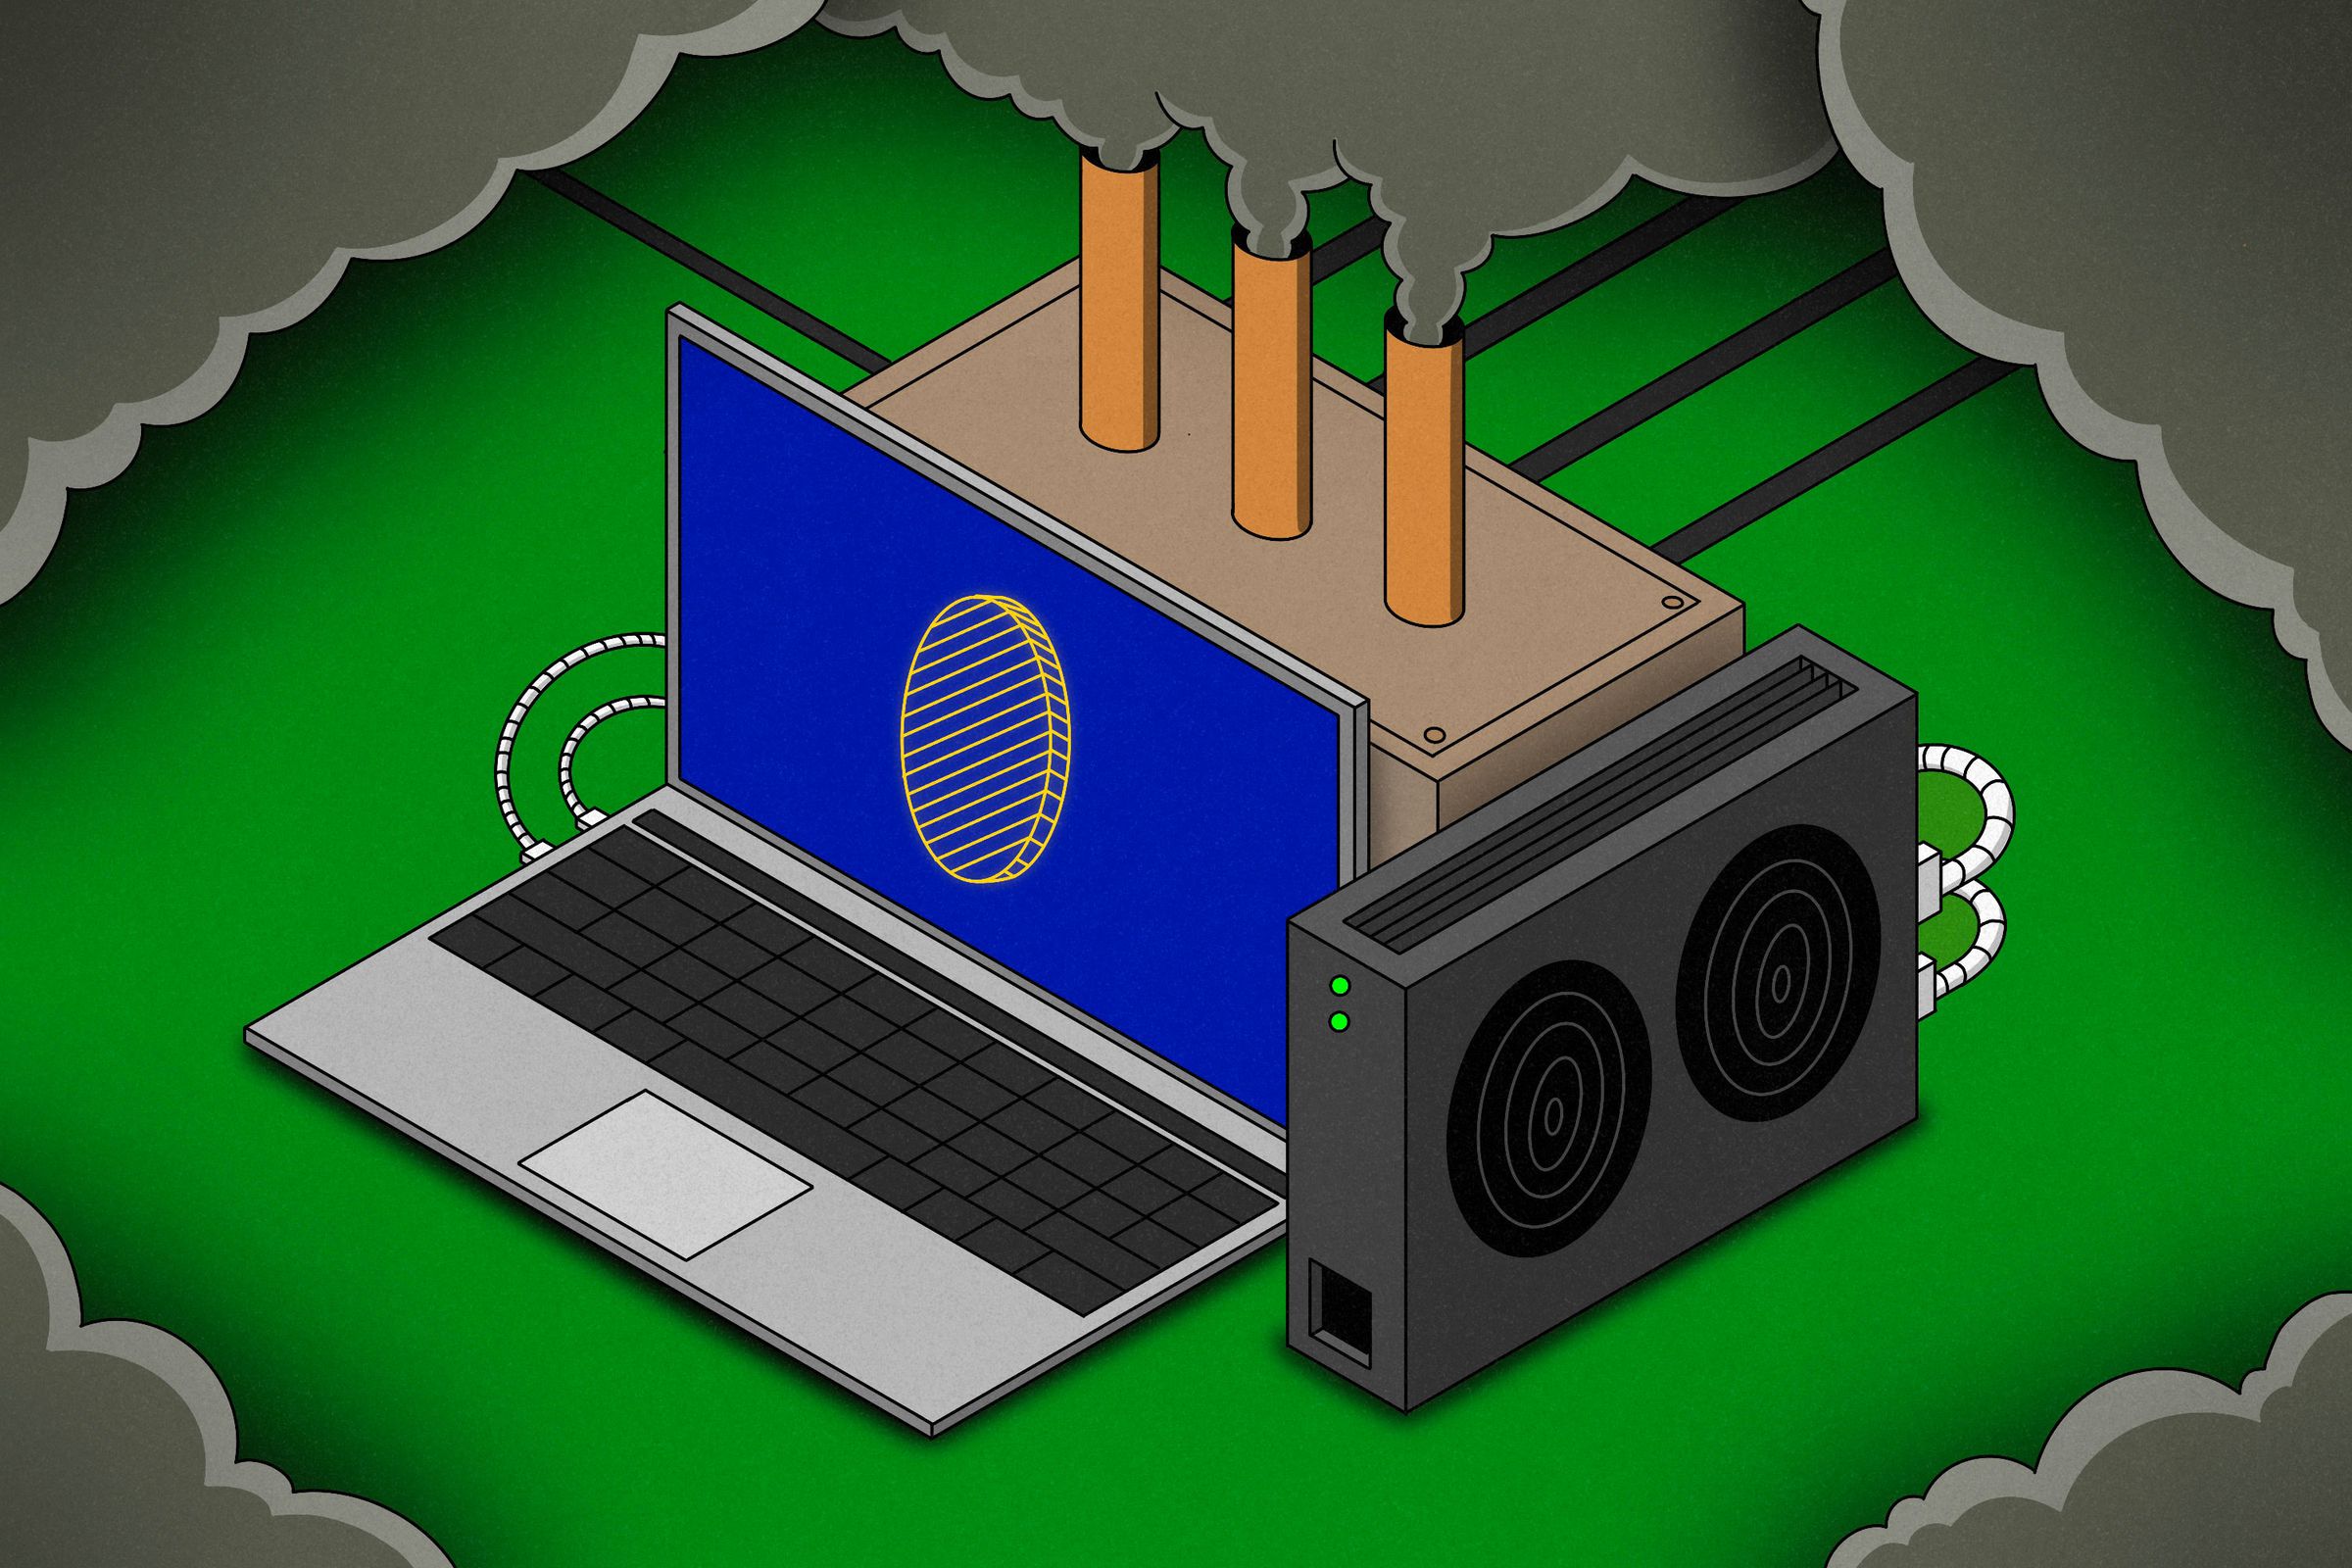 Art depicts a giant computer attached to a power plant spewing smoke out of three smokestacks.